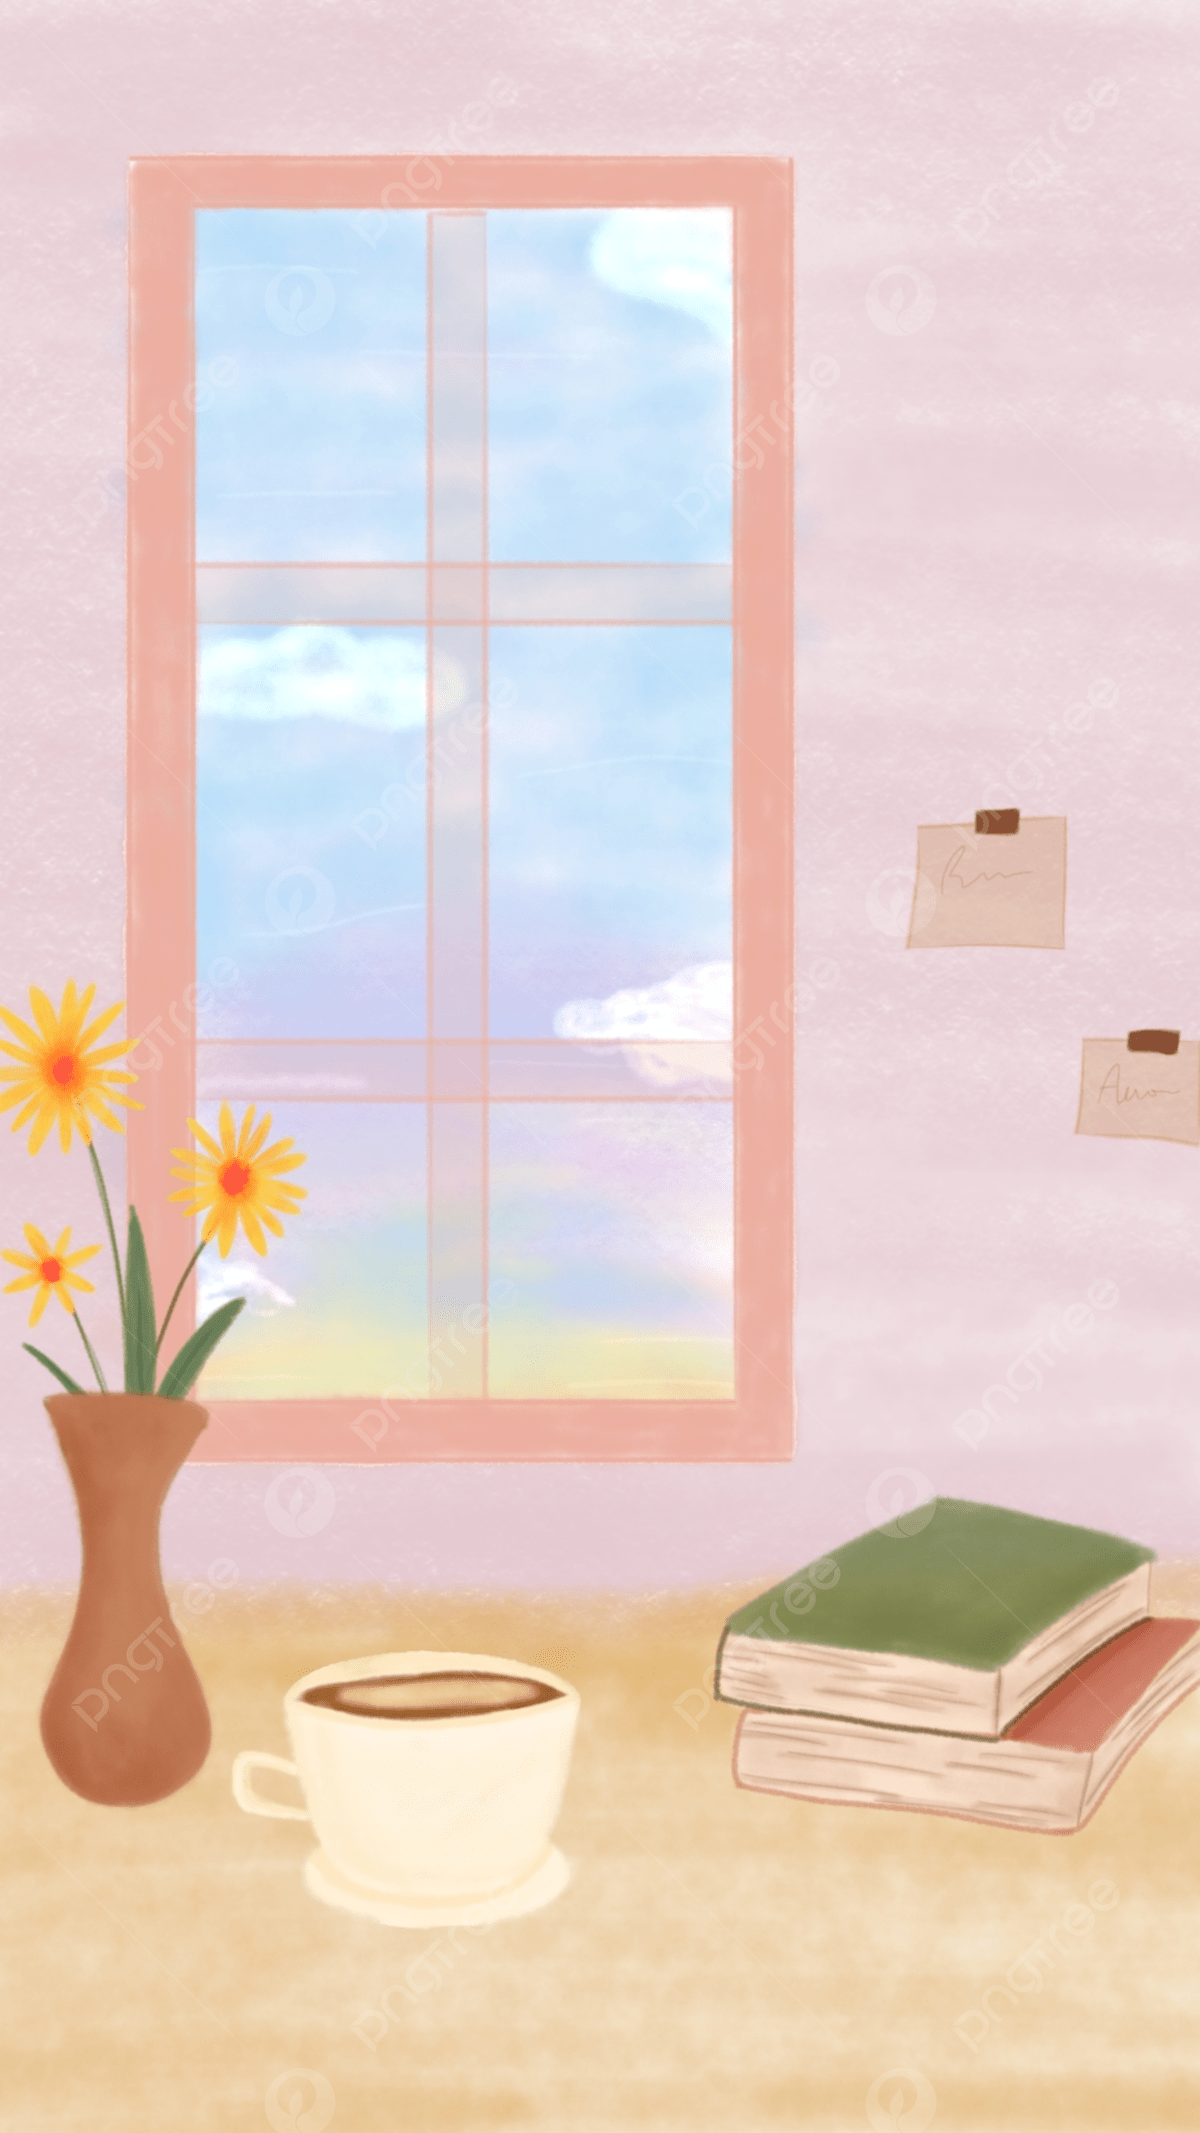 Illustration Of Aesthetic Room Wallpaper Background Wallpaper Image For Free Download